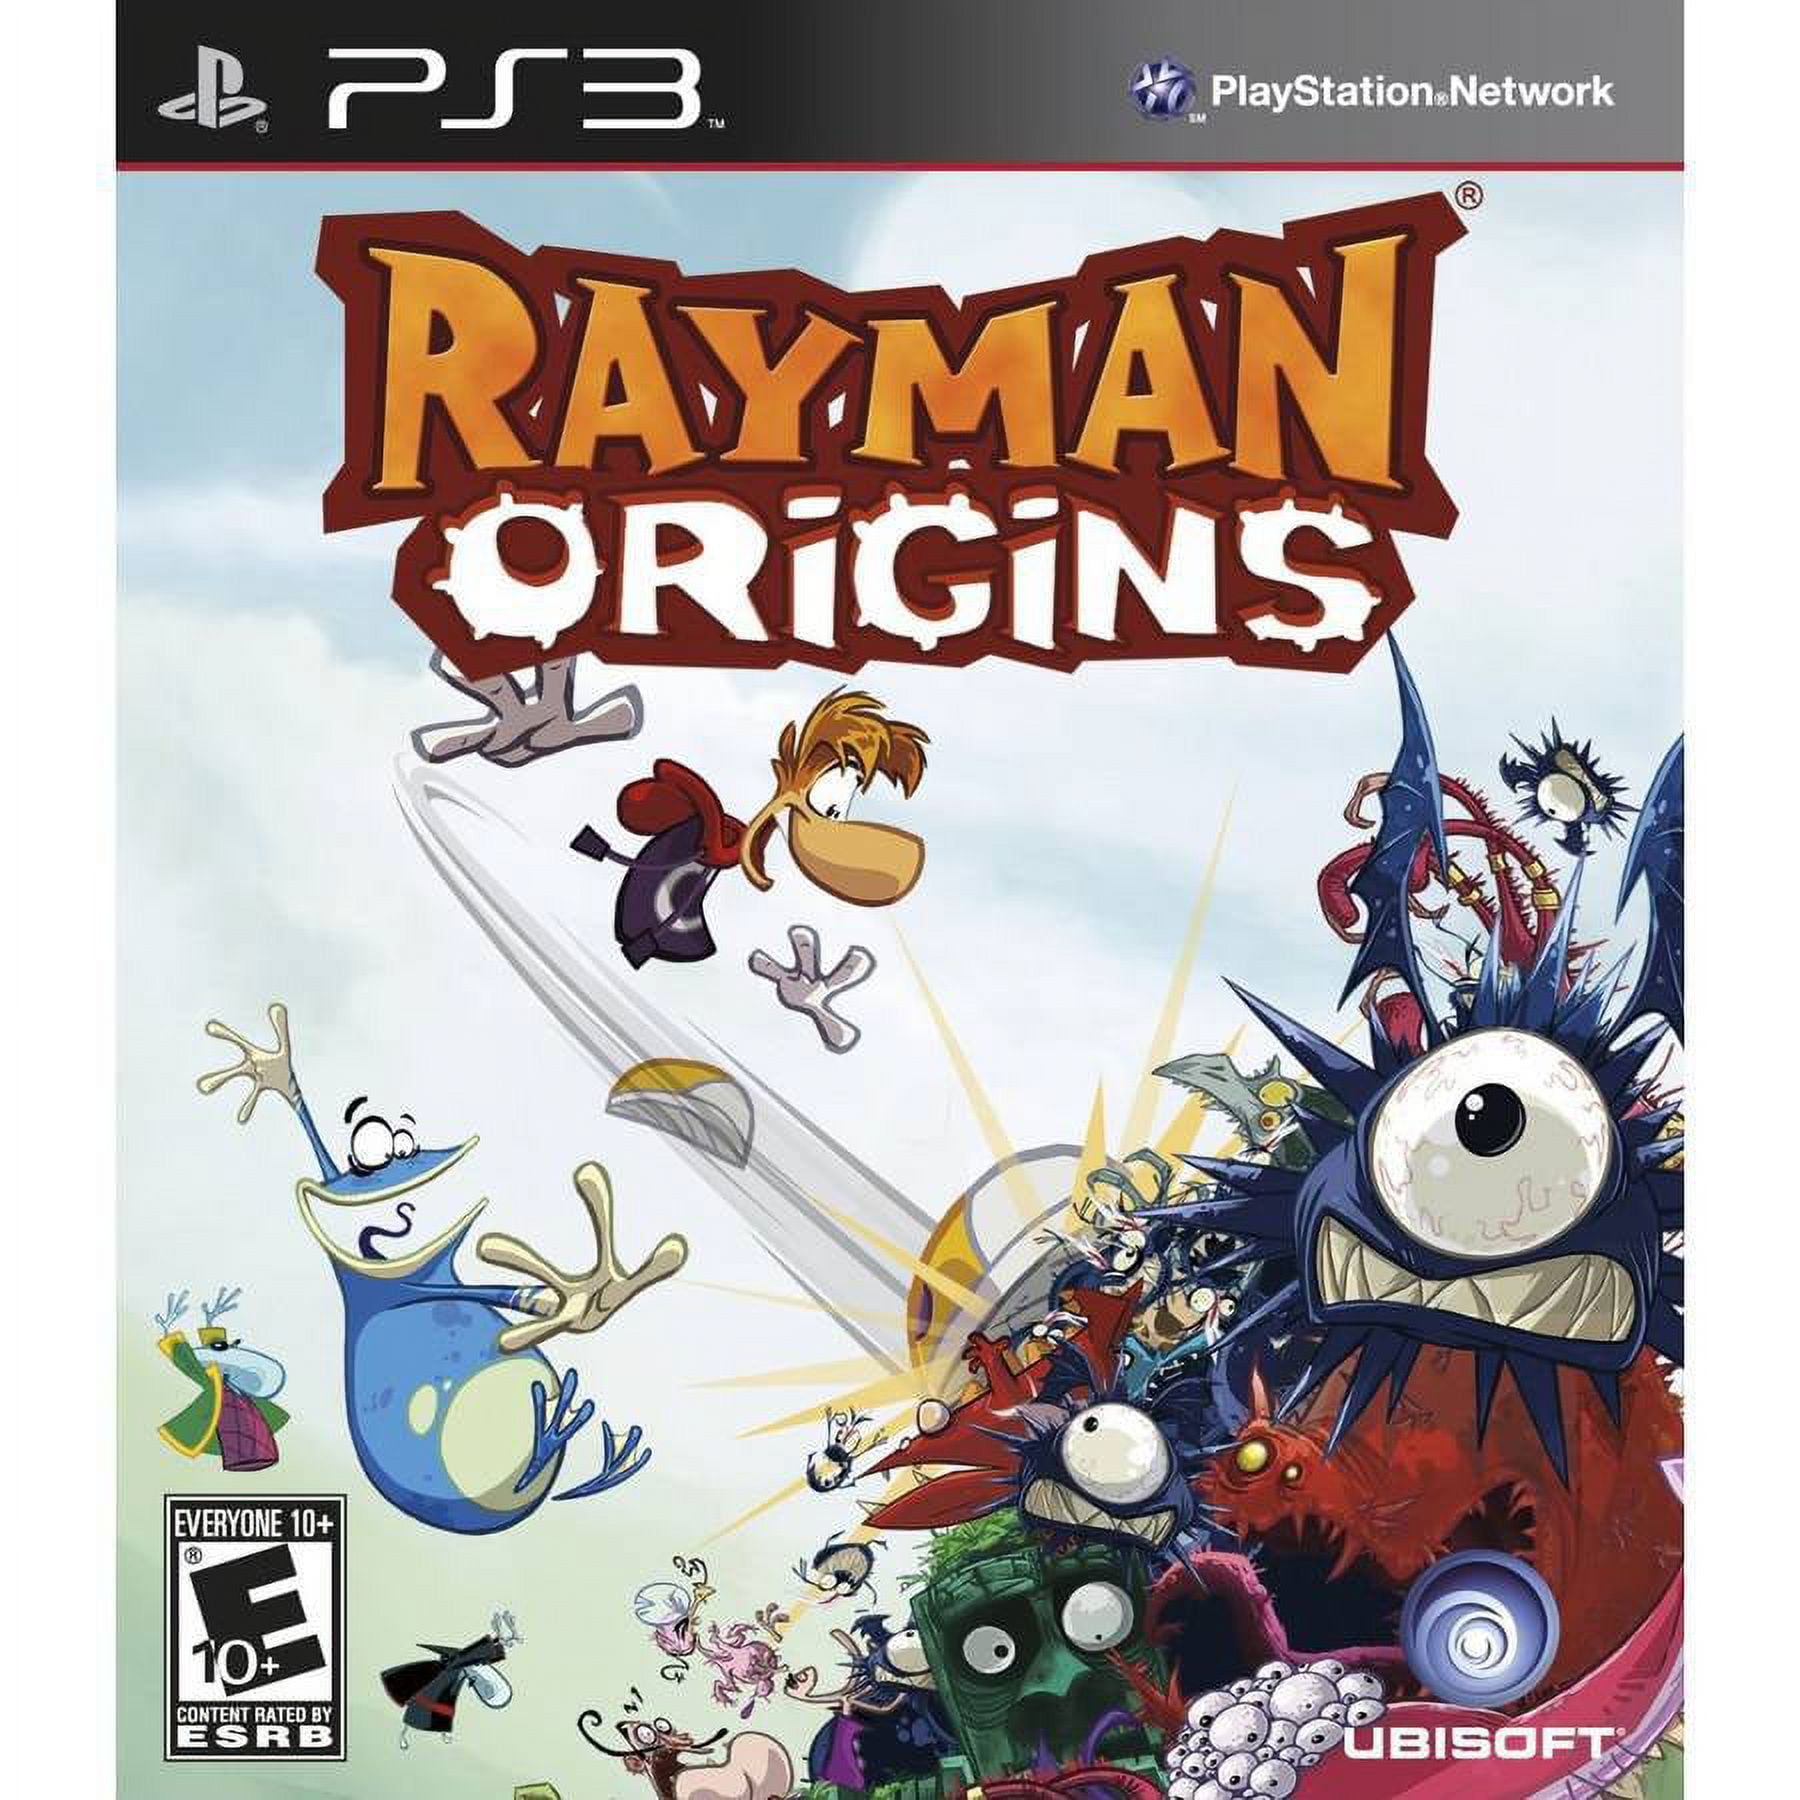 Rayman Legends Sony PlayStation 3 PS3 Video Game Working Tested